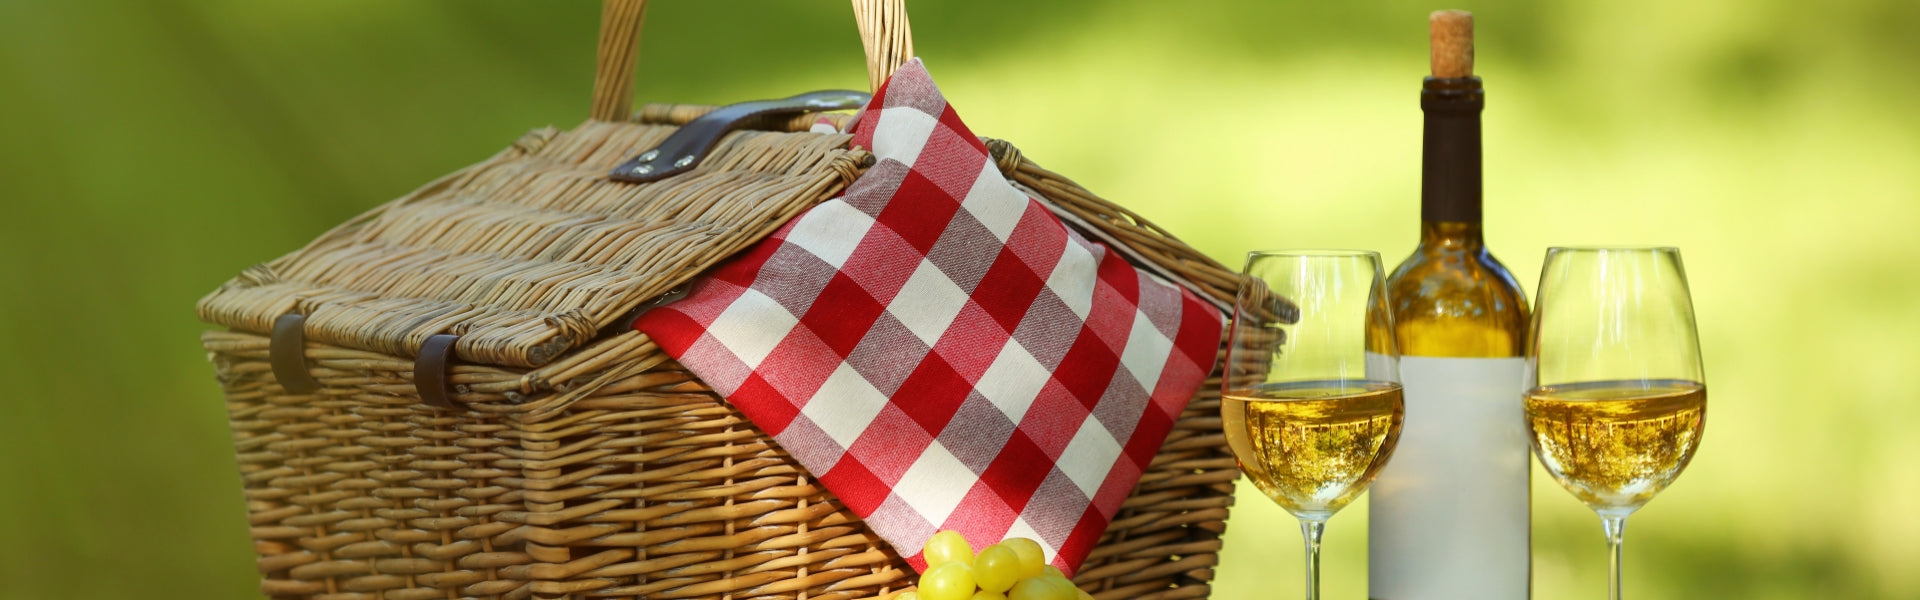 Empty Picnic Baskets | The Willow Basket